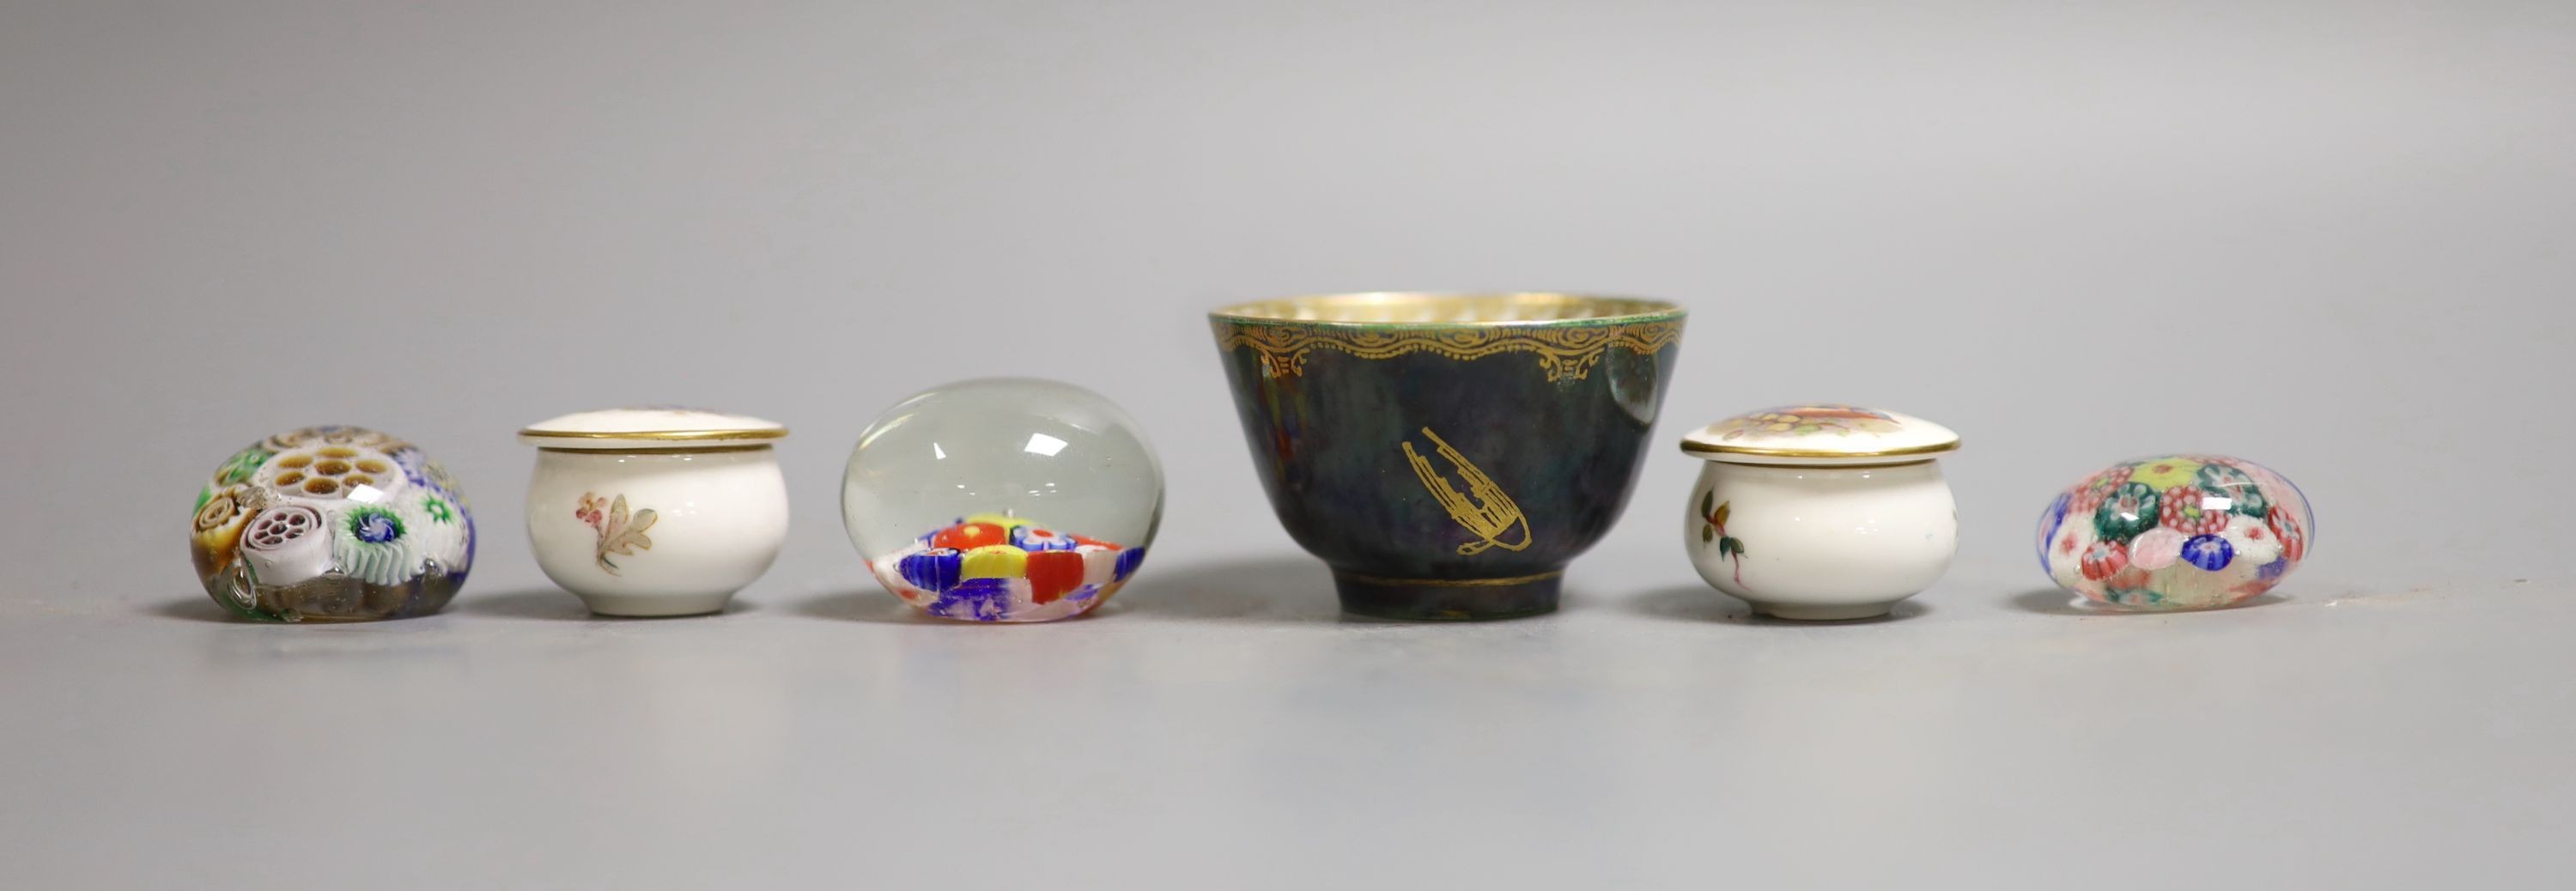 A Wedgwood lustre small cup, 4cm high, two Royal Worcester 'bird' pots & covers and three glass millefiori paperweights.